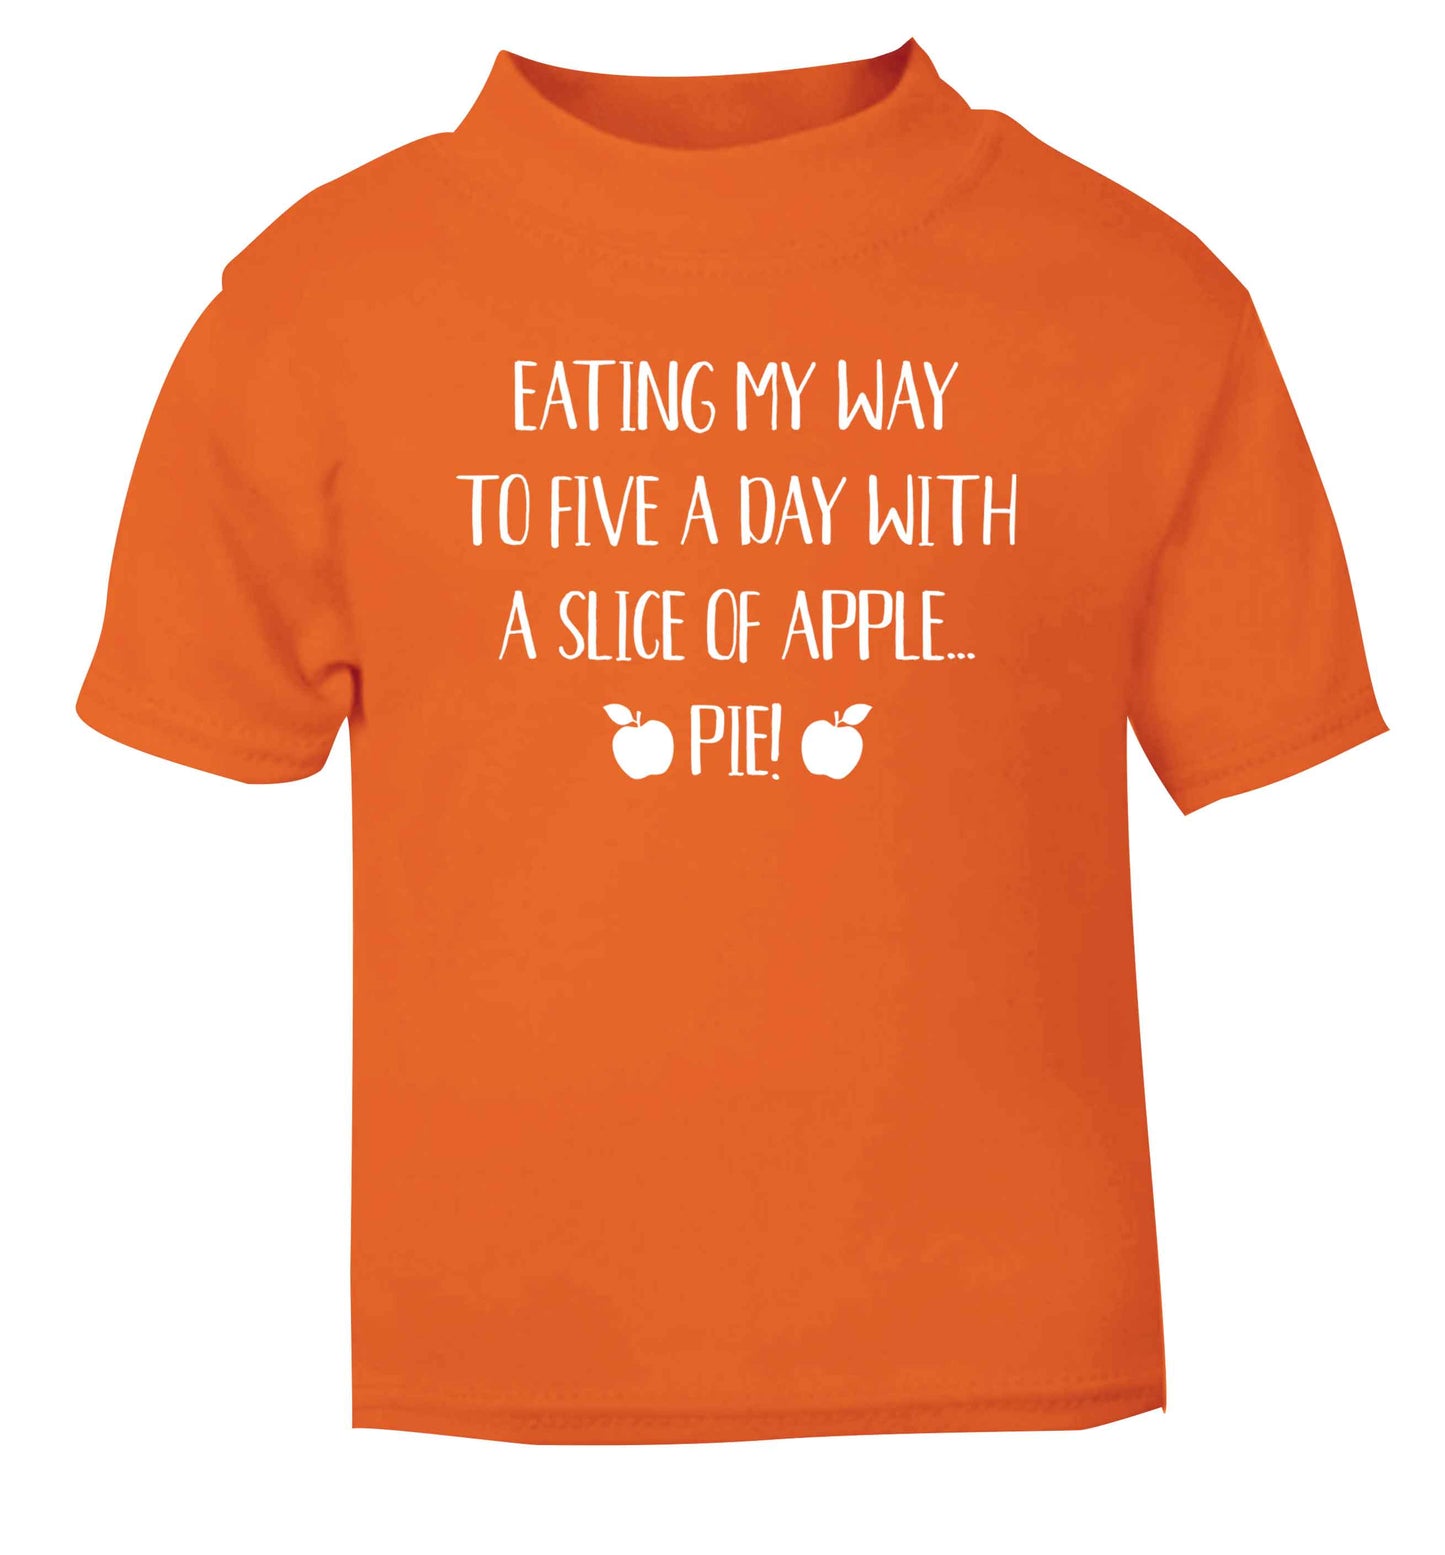 Eating my way to five a day with a slice of apple pie orange Baby Toddler Tshirt 2 Years